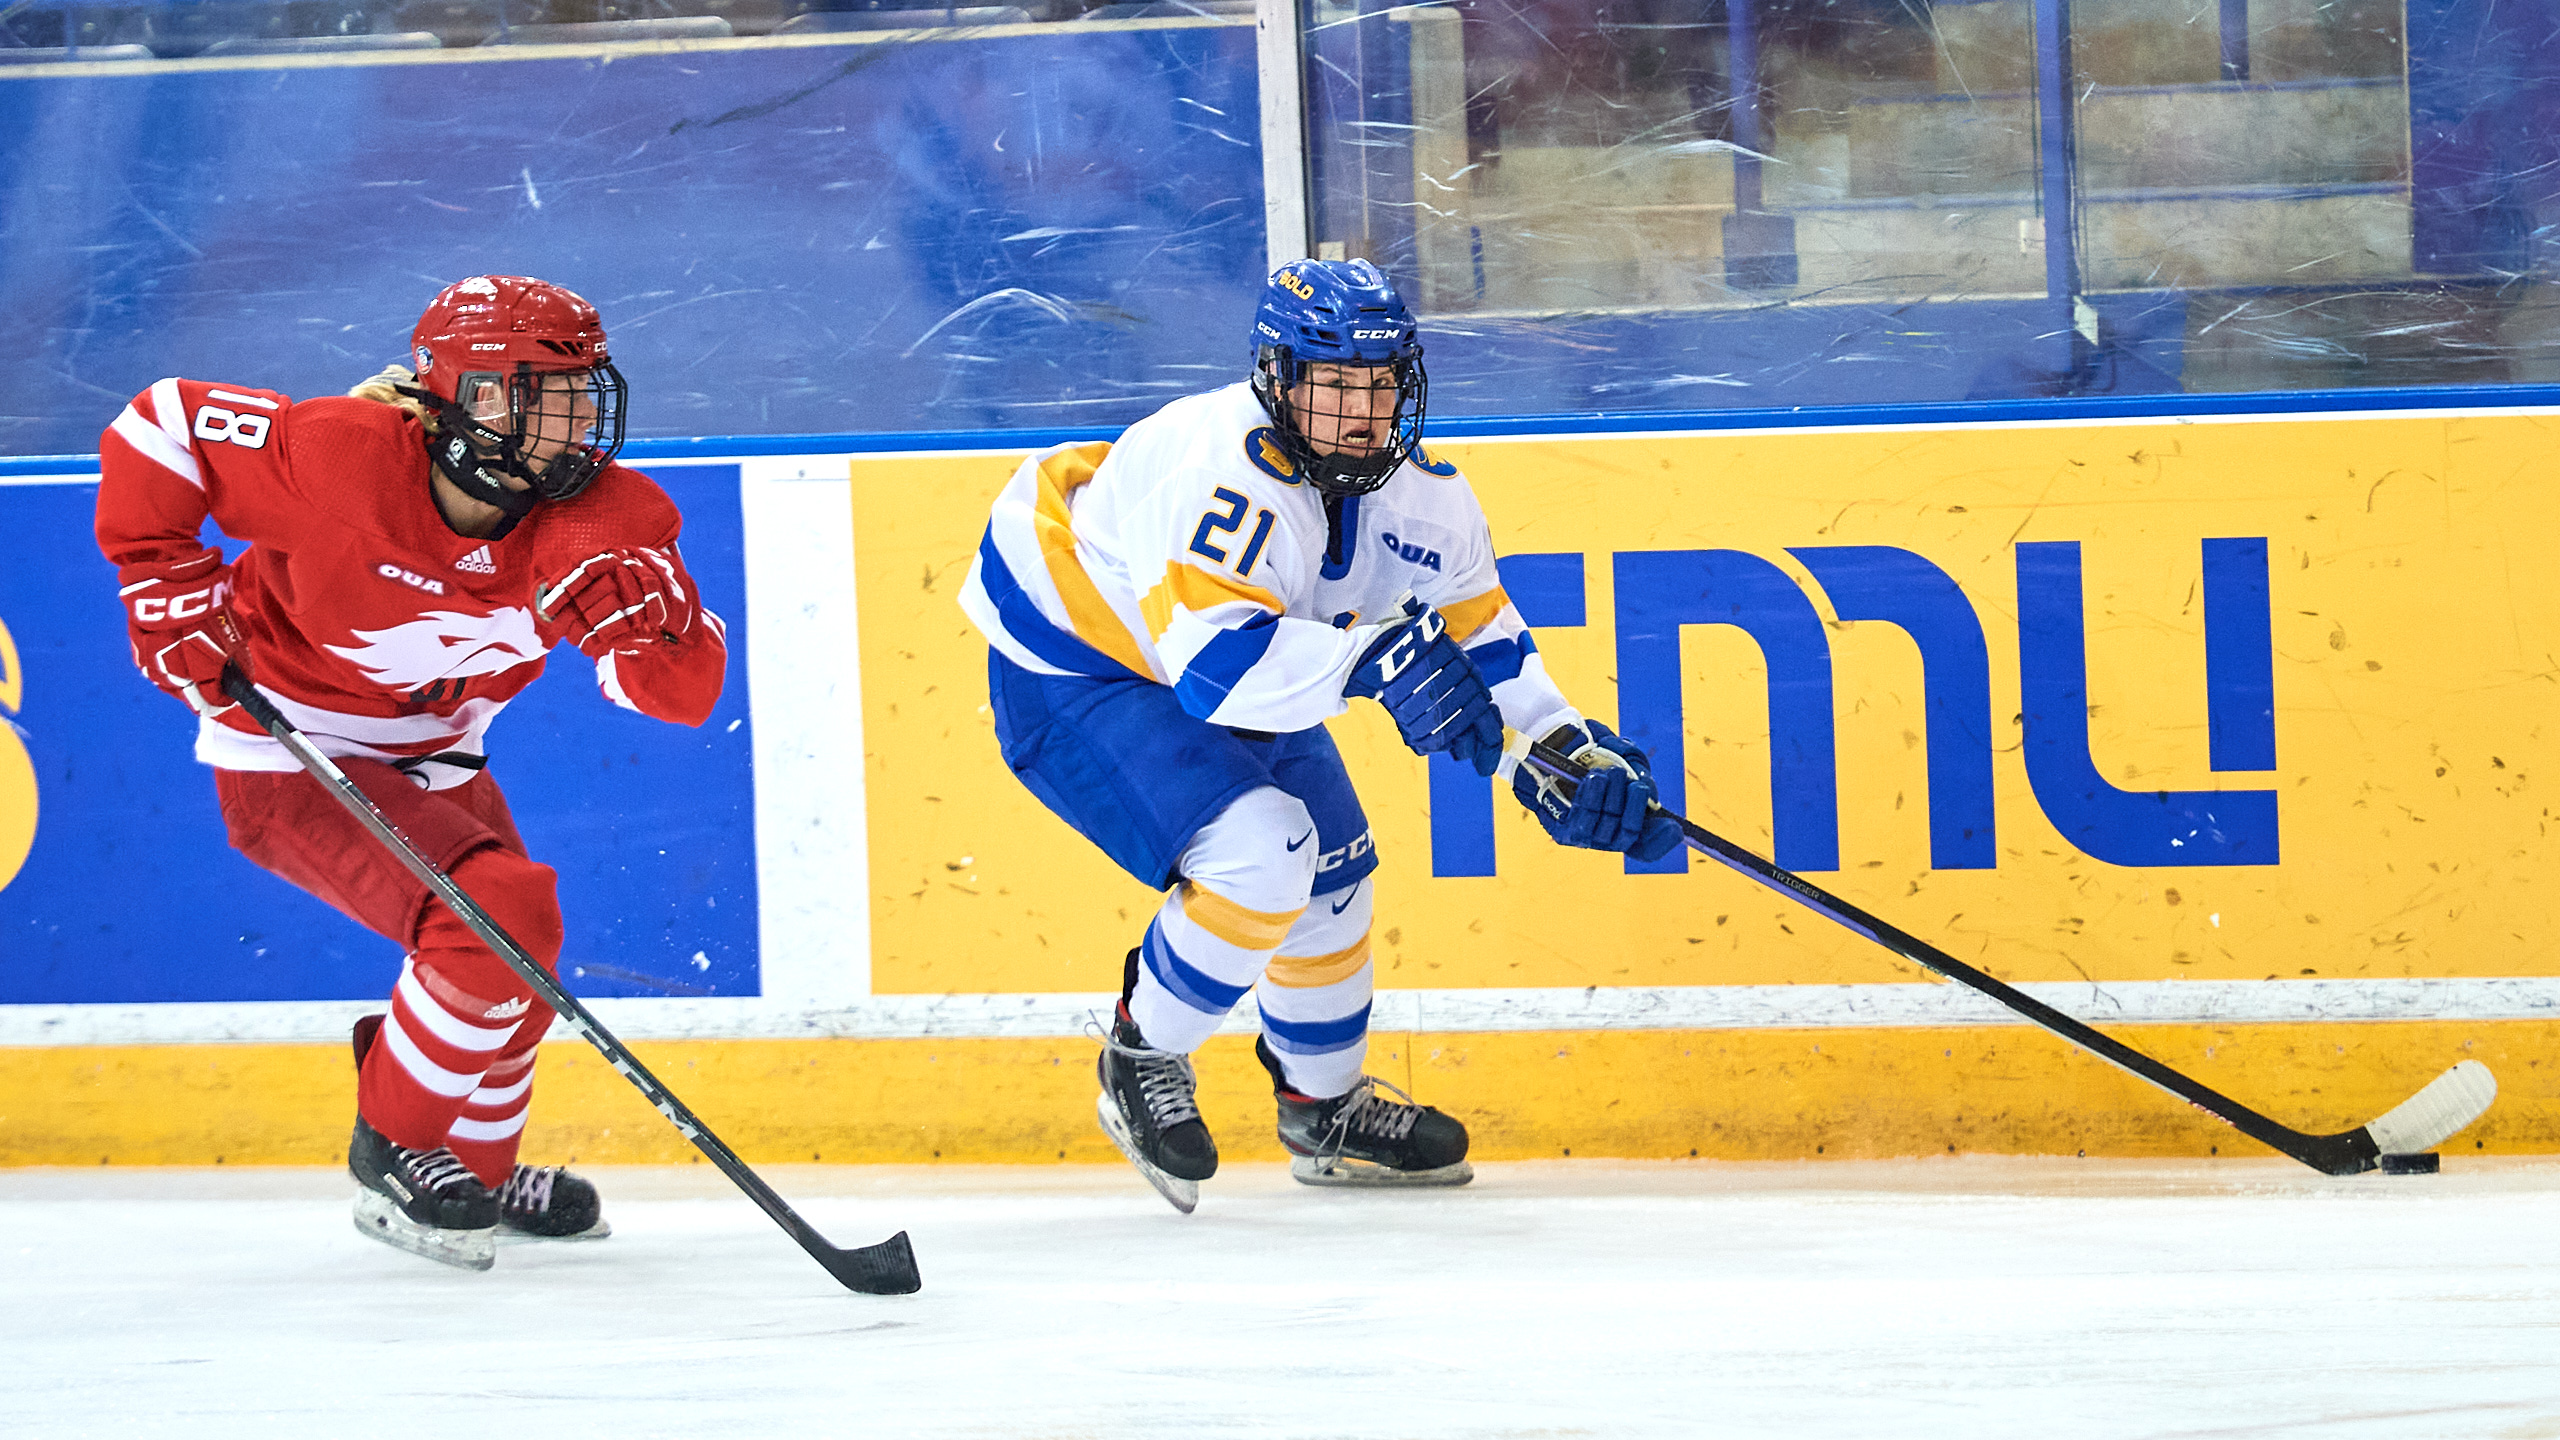 TMU women's hockey player Emily Baxter skates with the puck while being chased by a York Lions defender